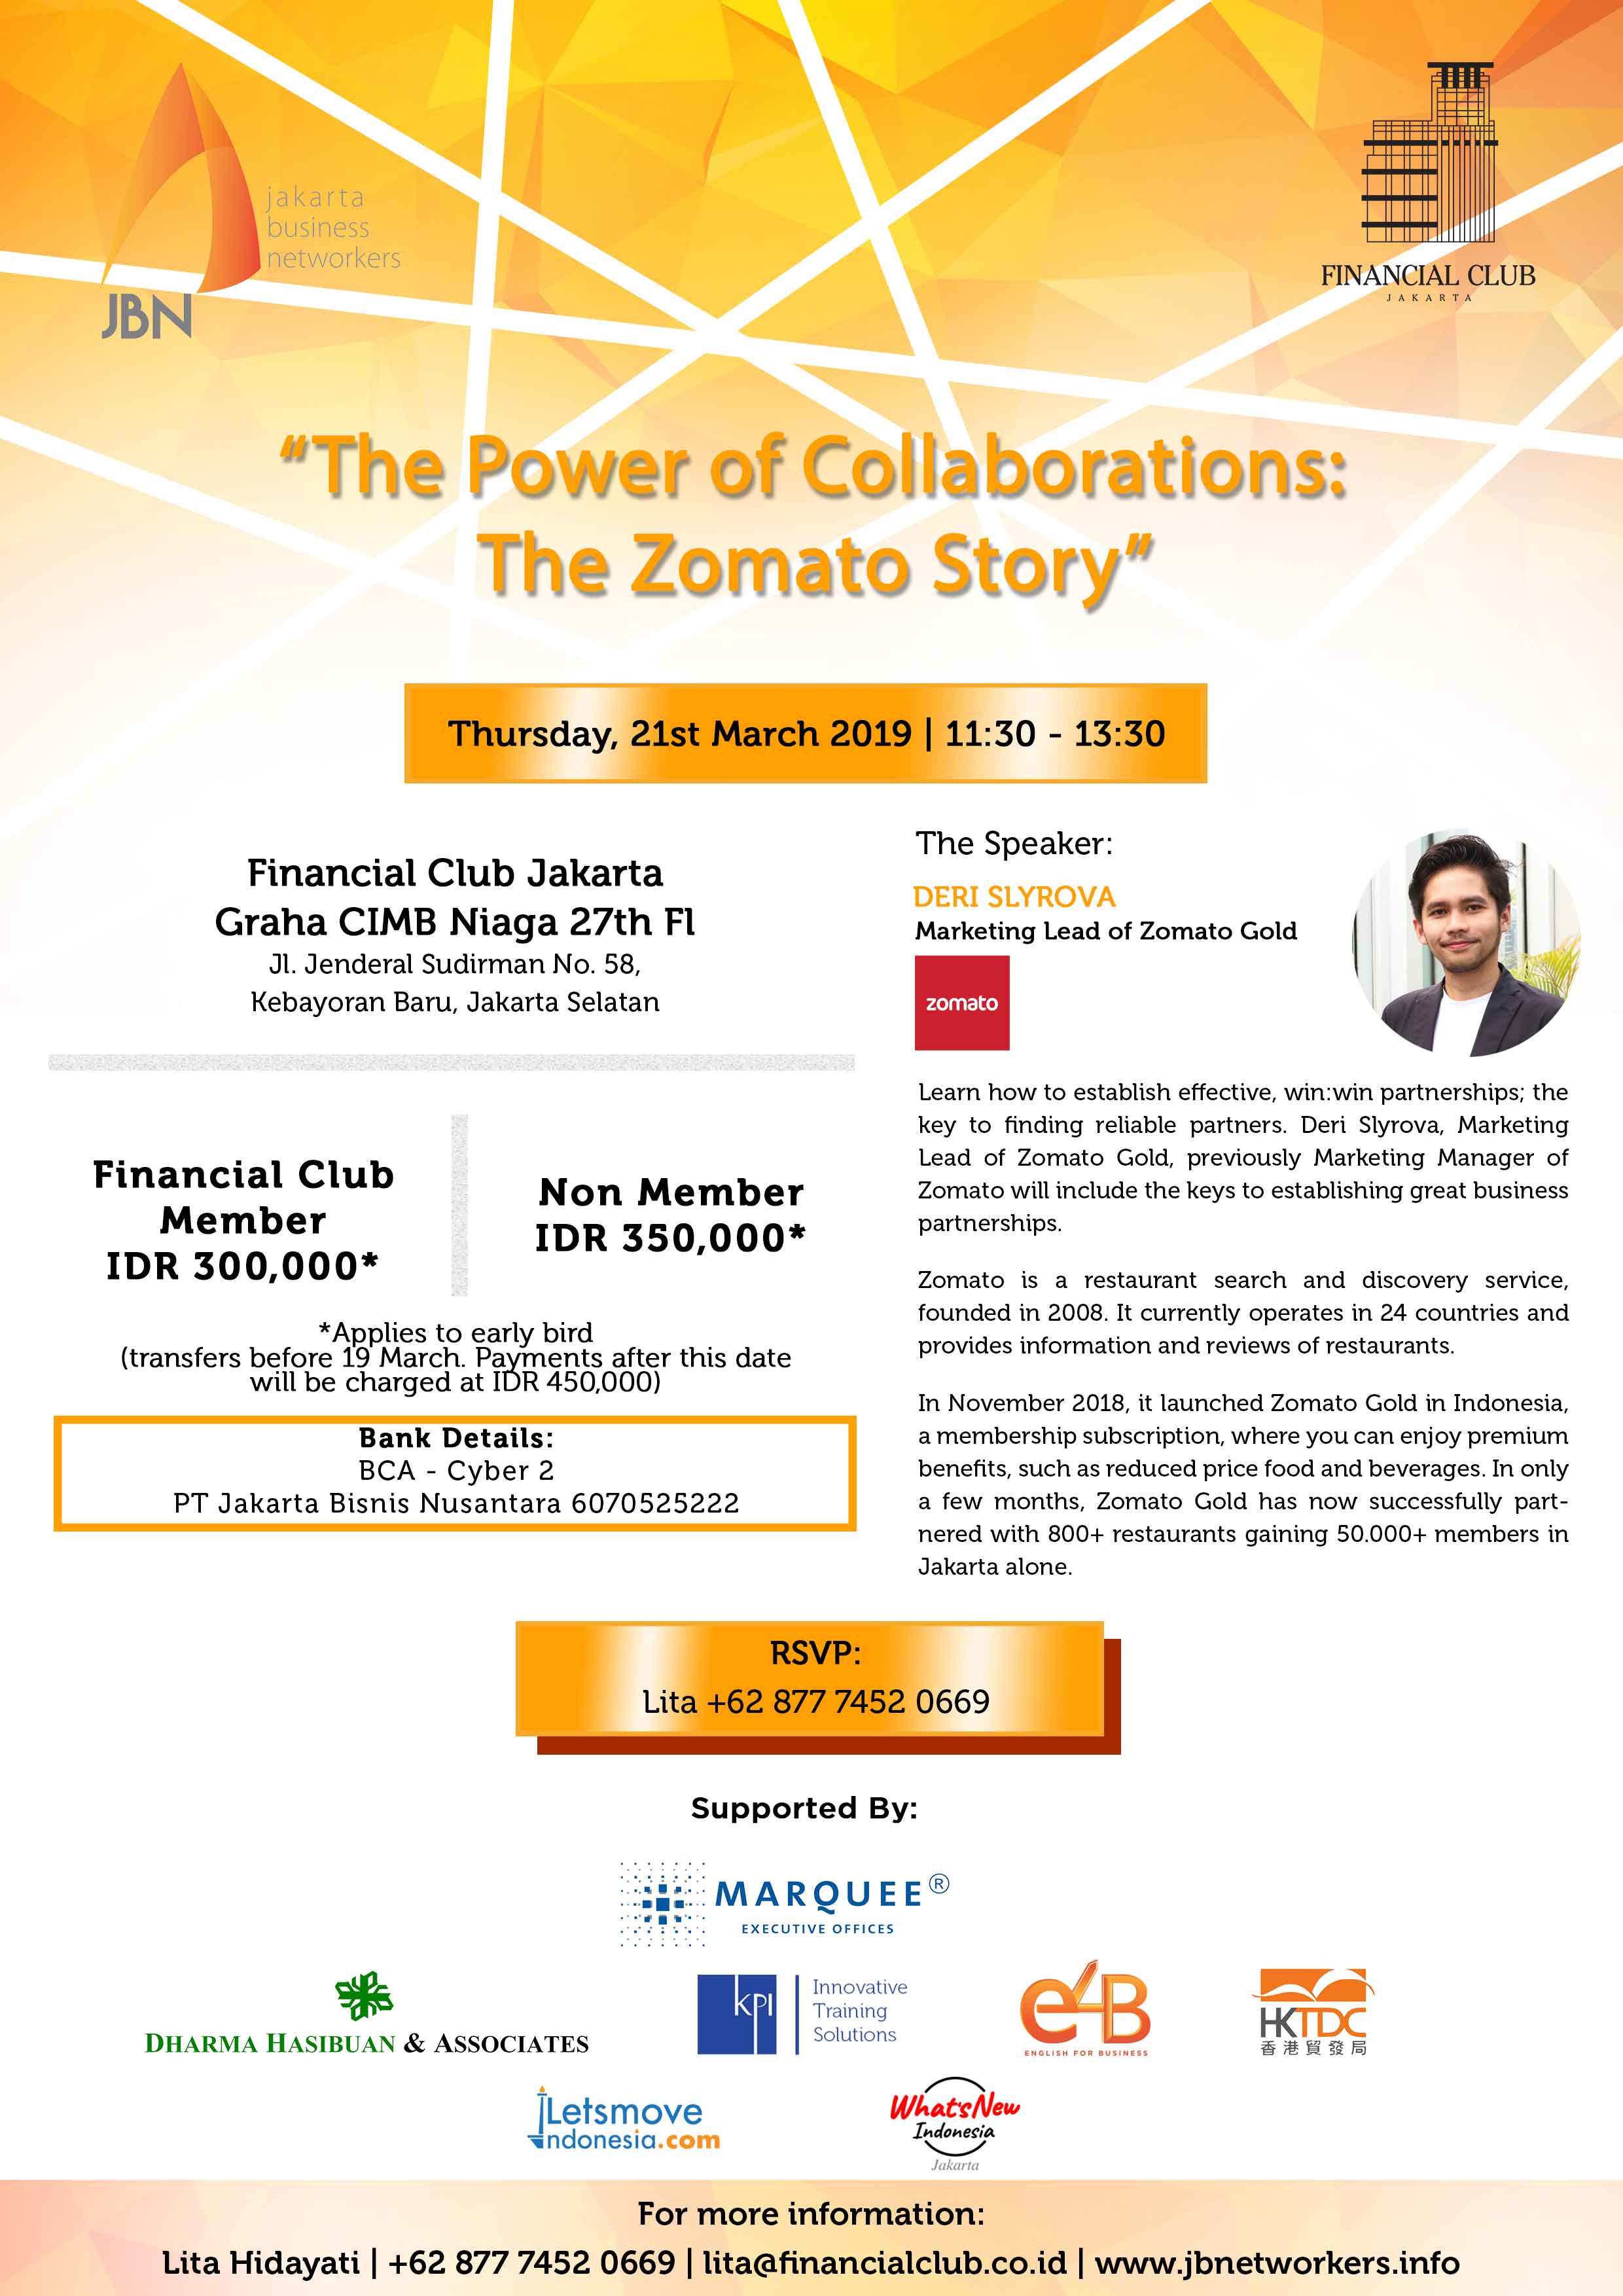 Speed Networking on Thursday, 21 March 2019 at Financial Club Jakarta